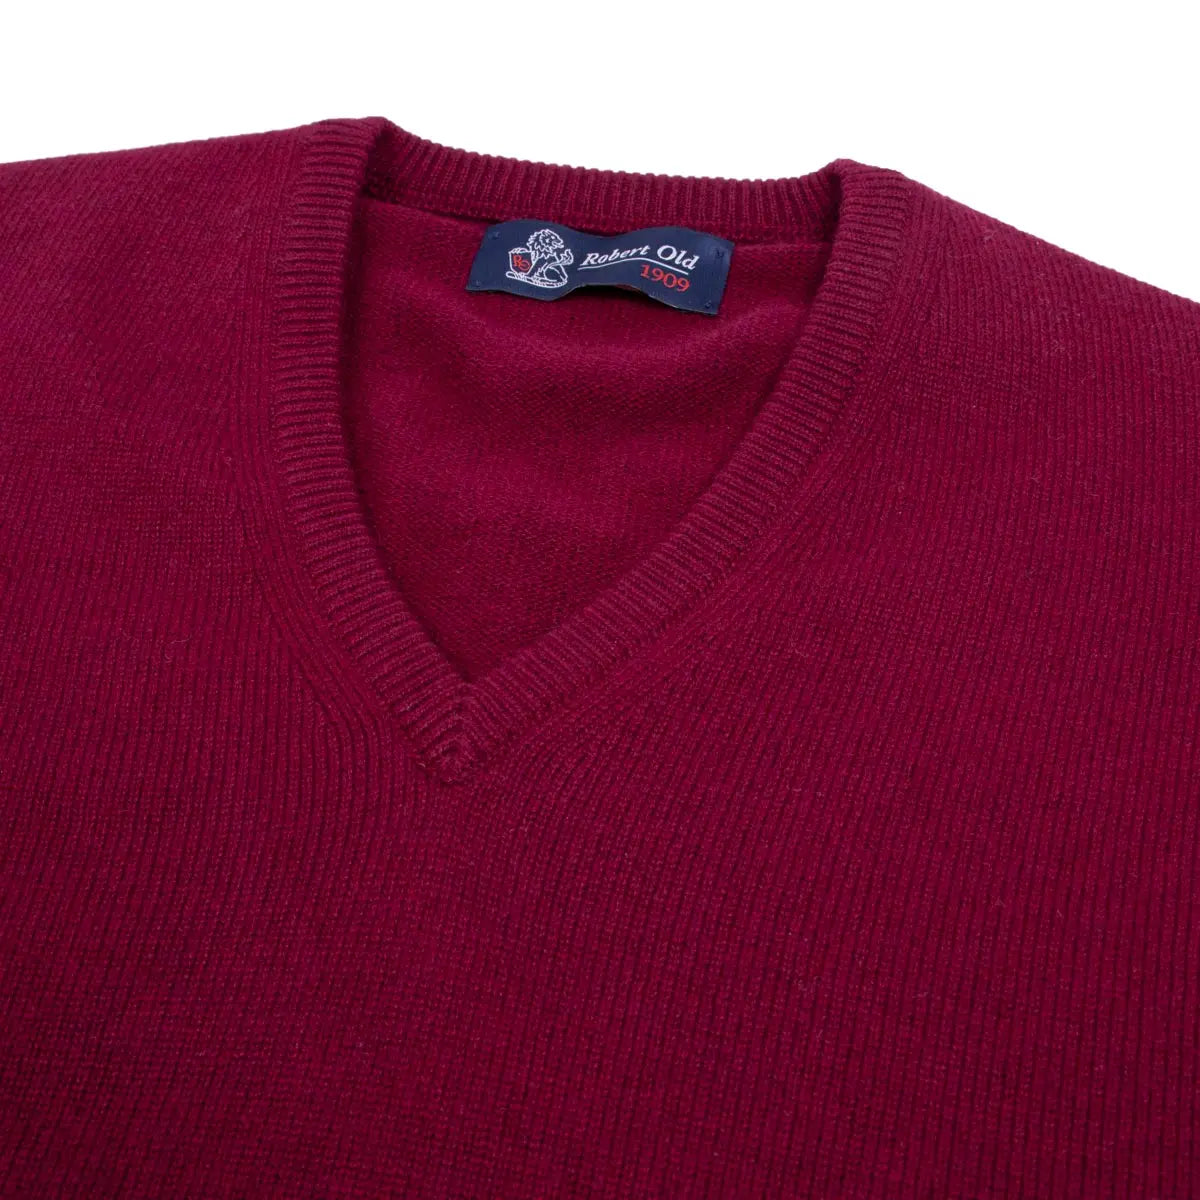 Claret Red Tobermorey 4ply V-Neck Cashmere Sweater Robert Old